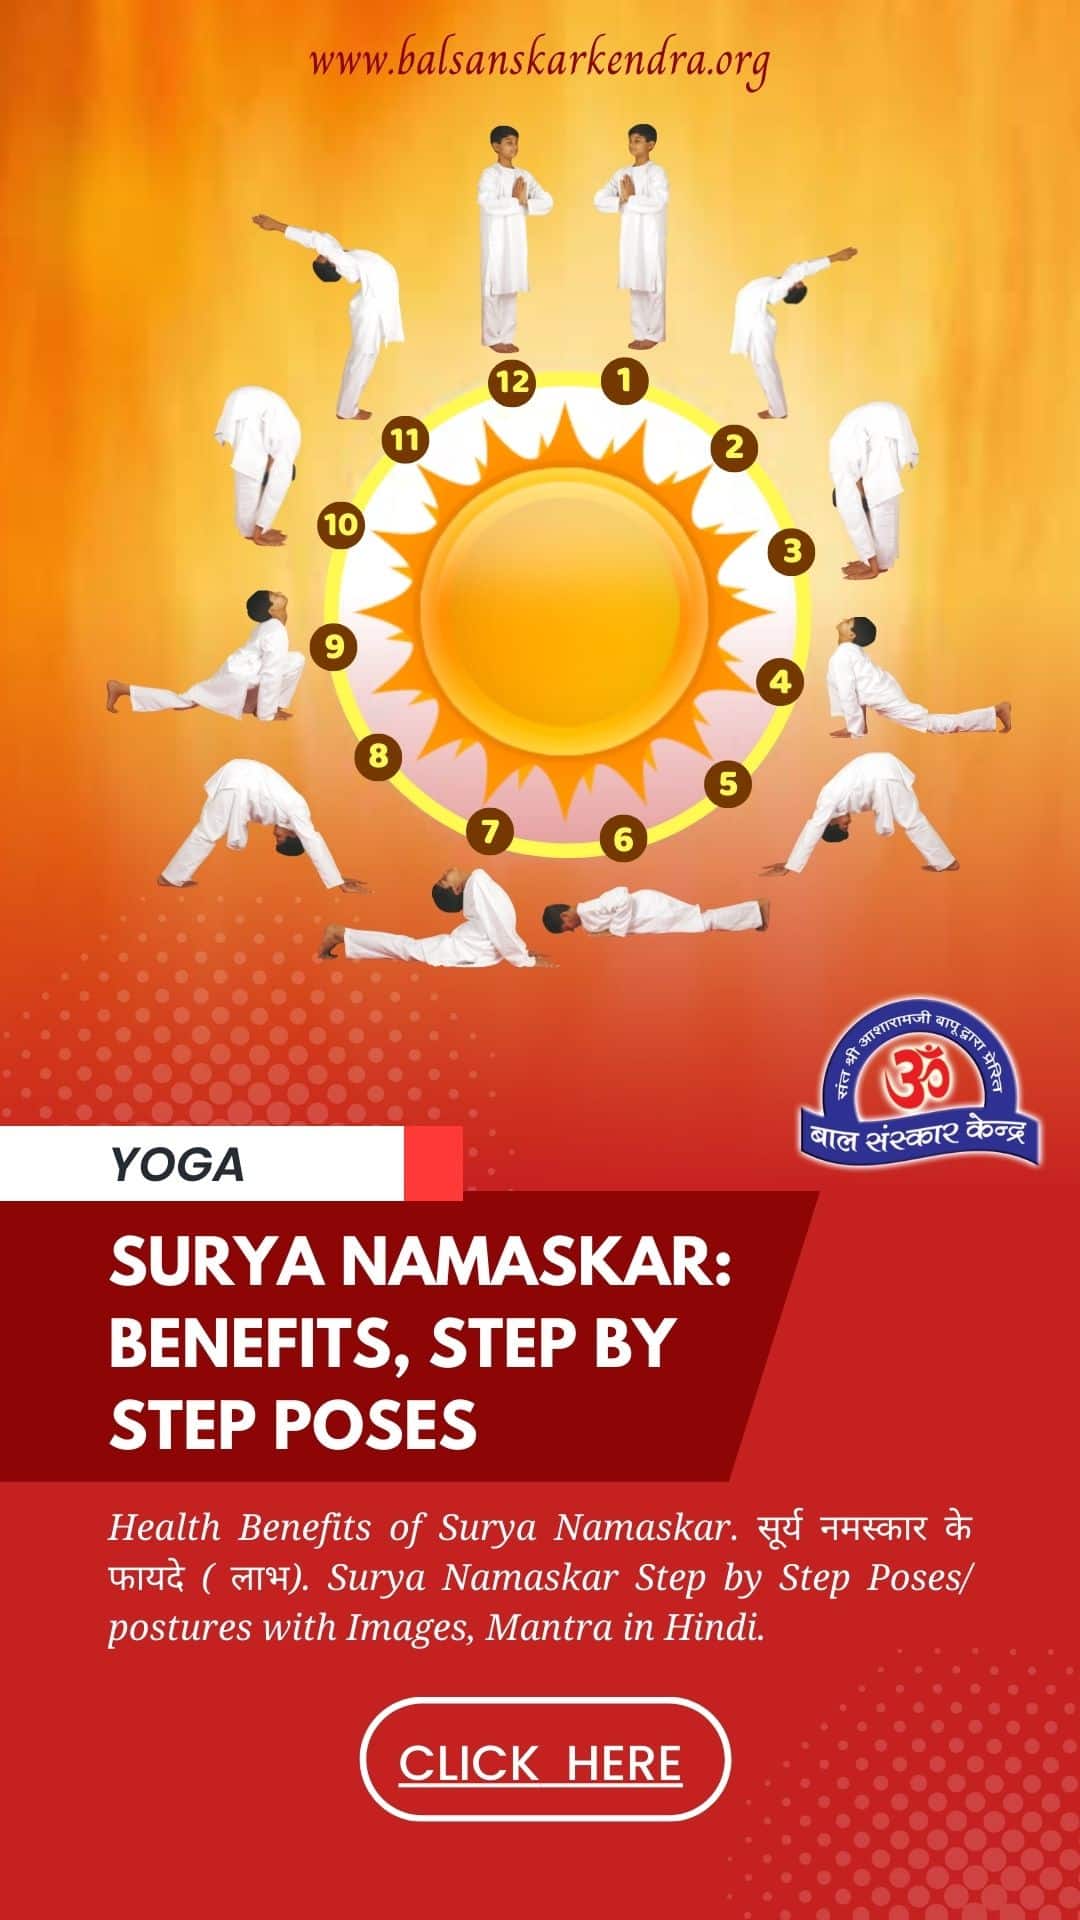 Chandra Namaskar _ Benefits, Steps and Best time to practice.pdf